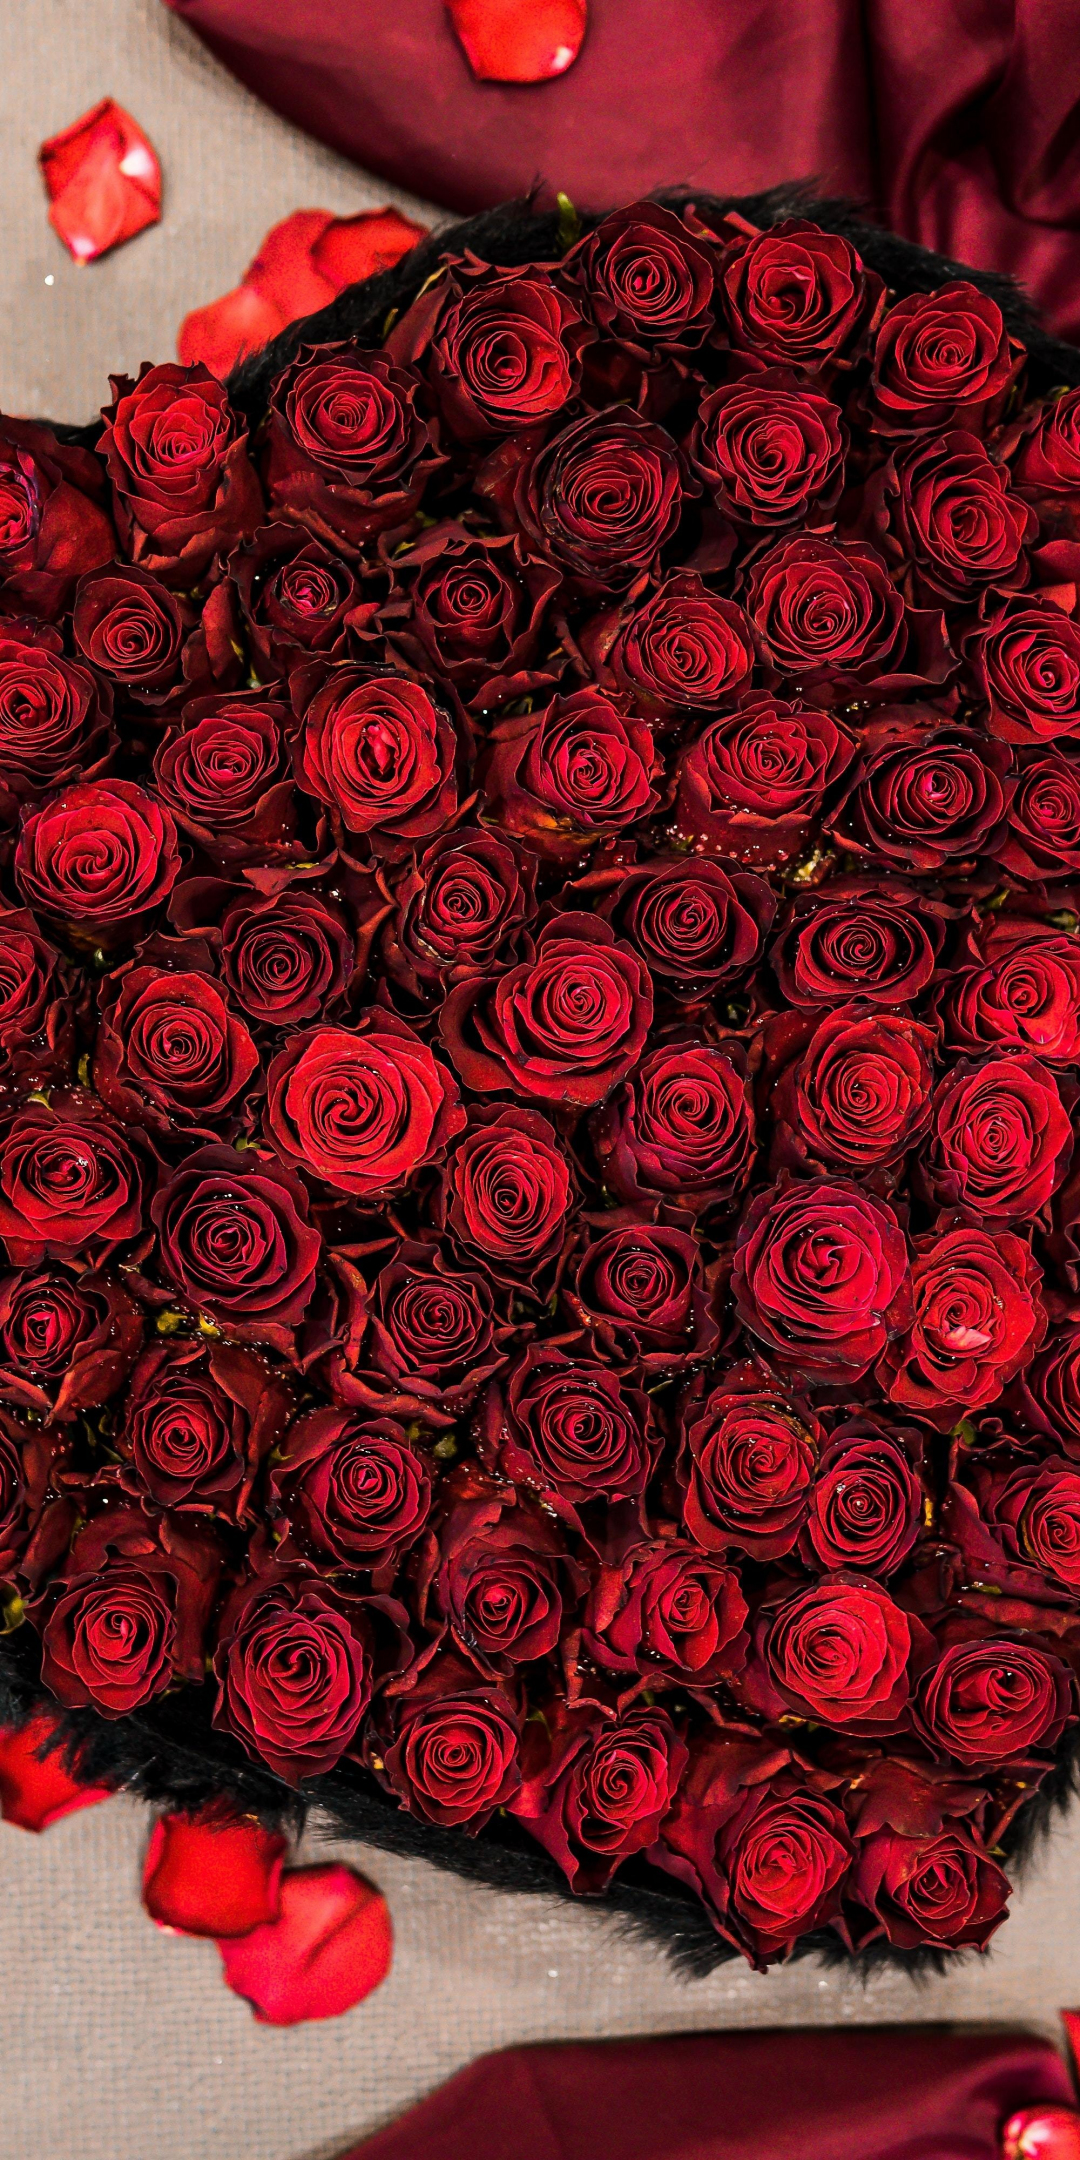 roses with hearts wallpaper